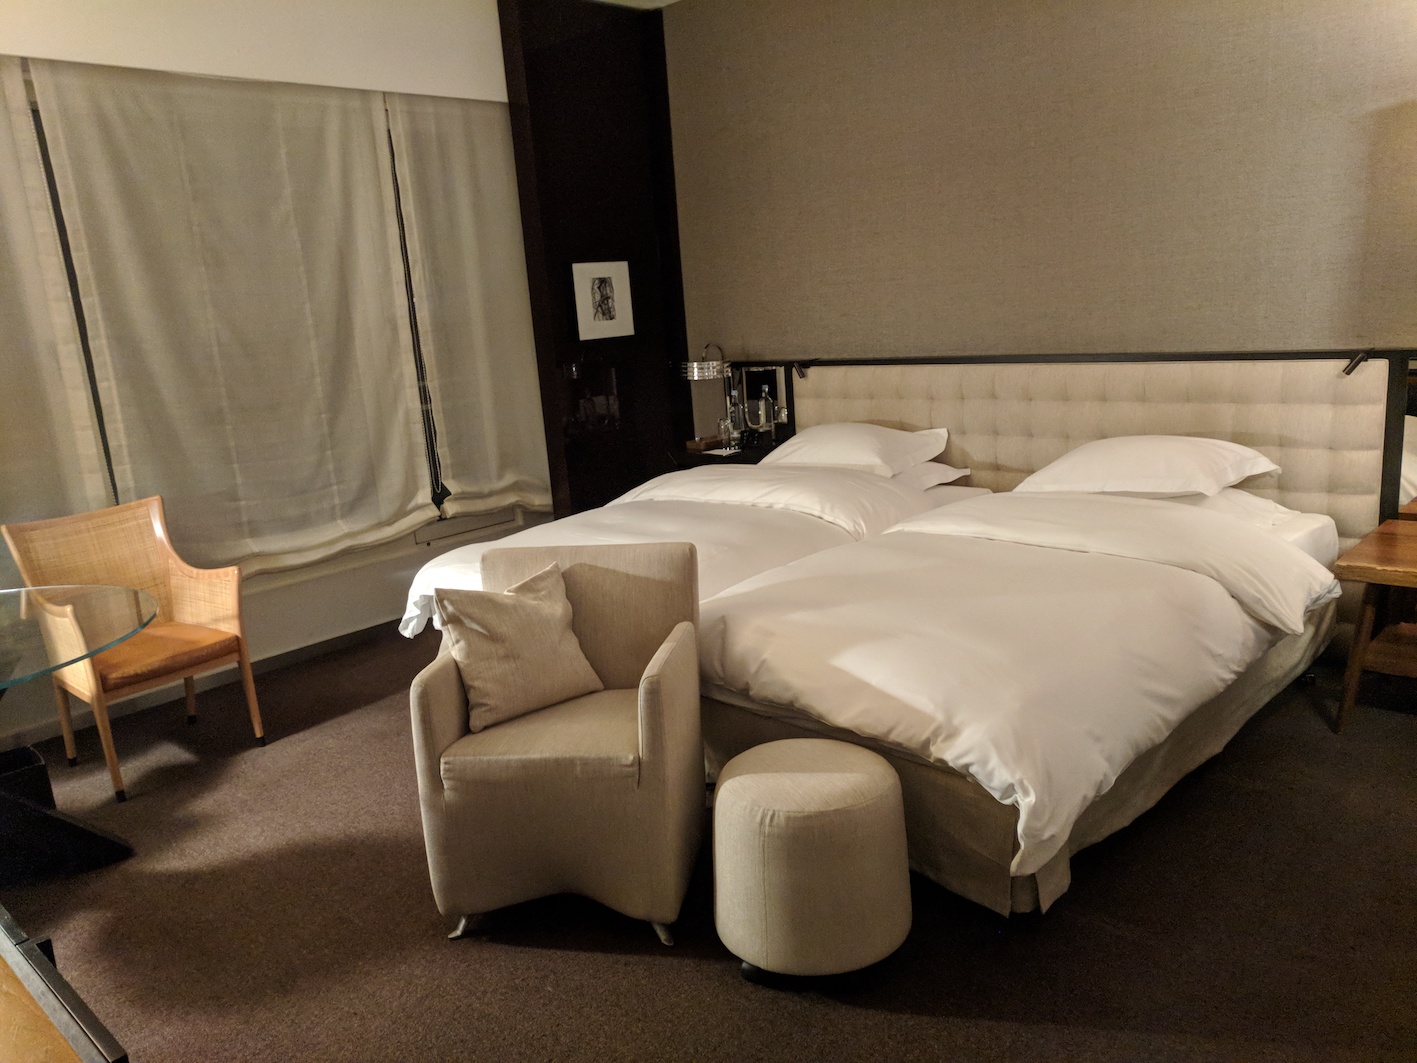 a bed with pillows and chairs in a room